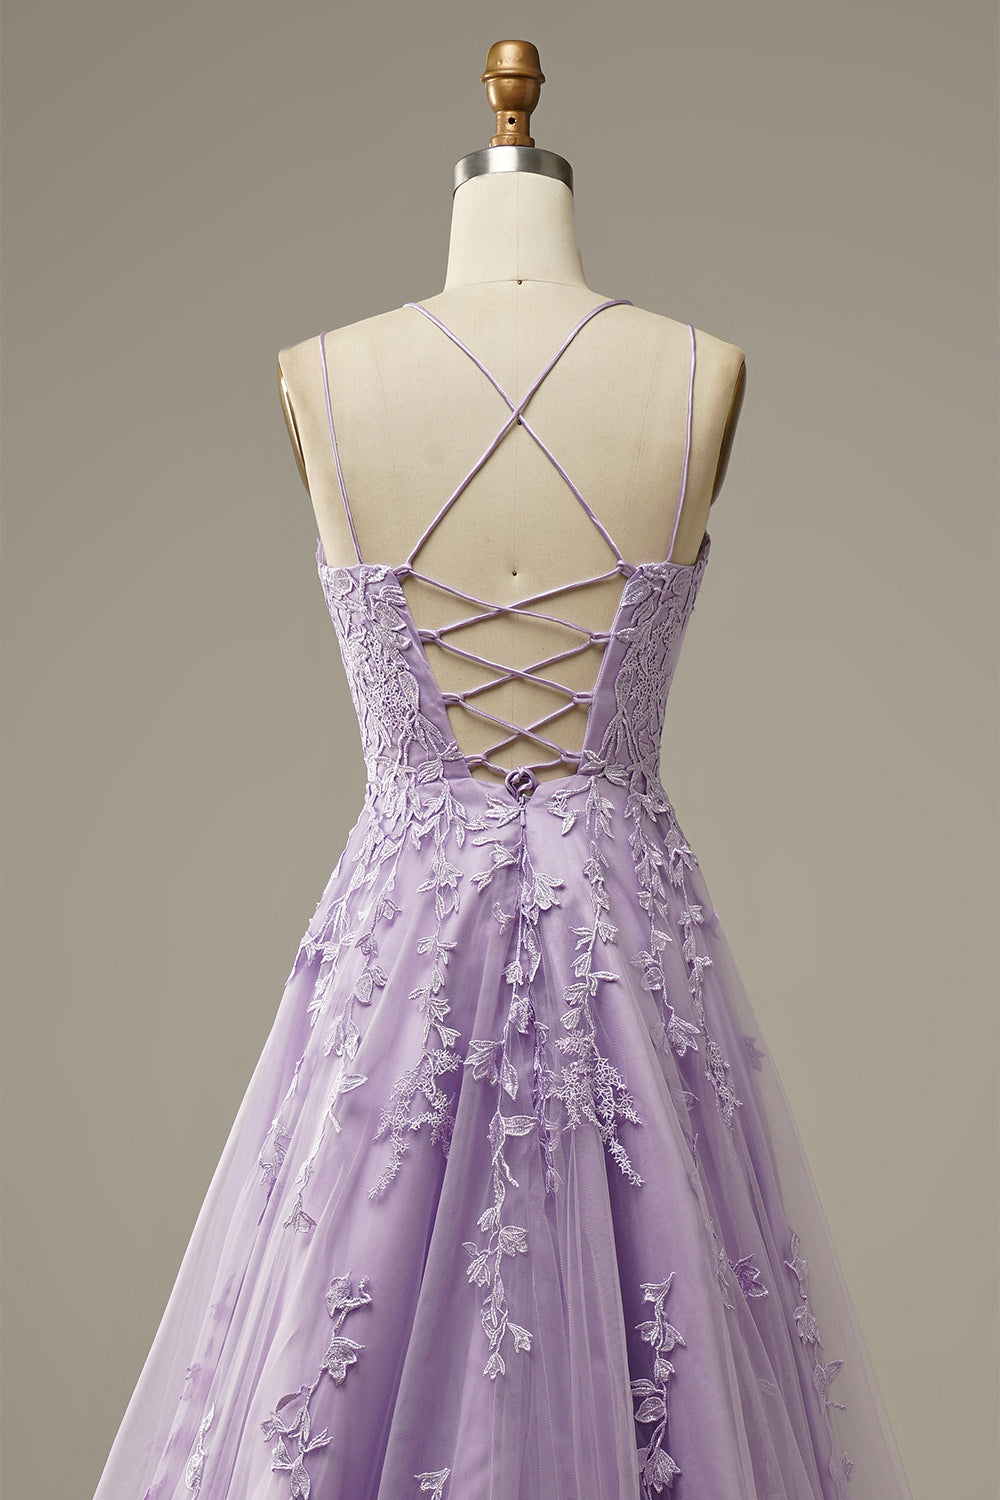 Purple A-Line Spaghetti Straps Tulle Prom Dress with Appliques